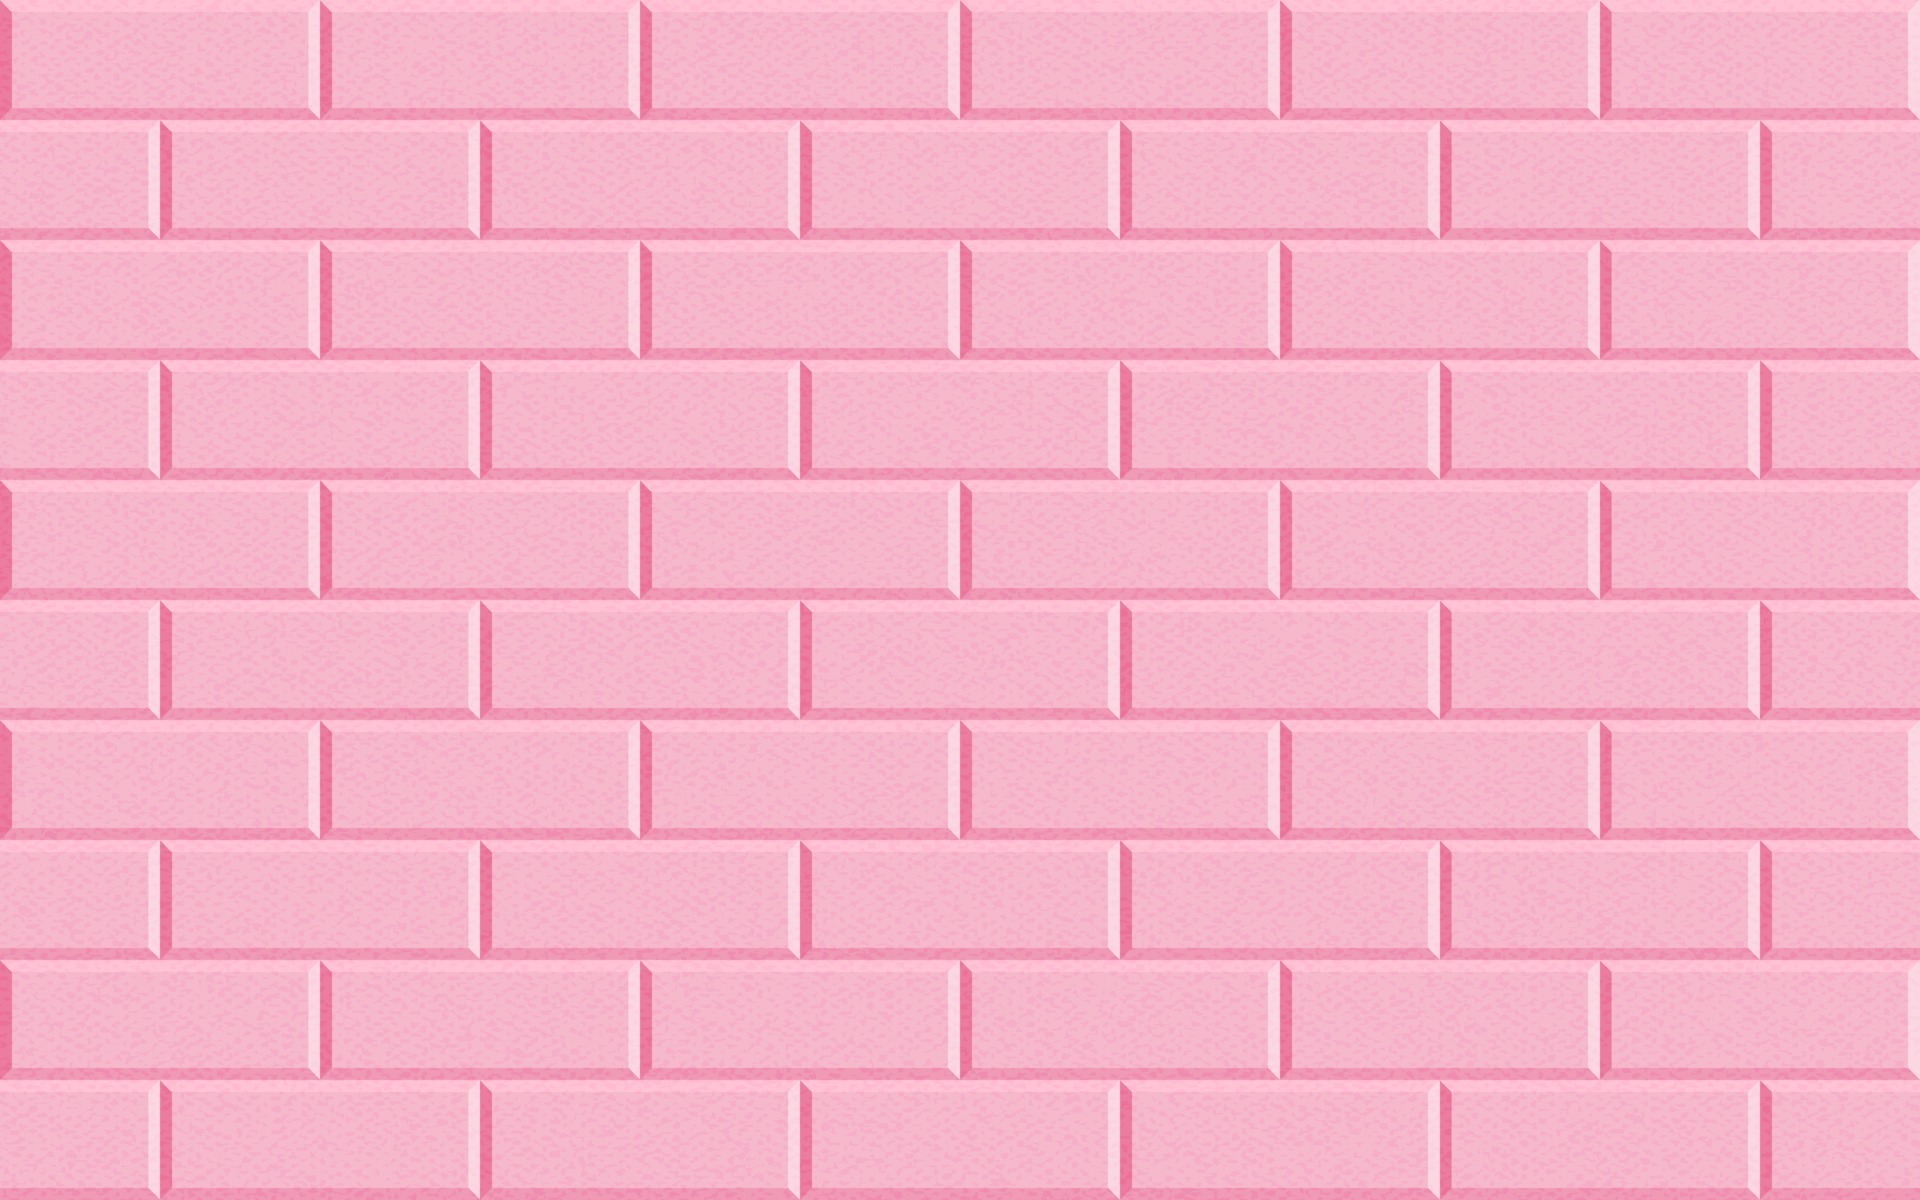 Pink Brick Wall Pictures  Download Free Images on Unsplash